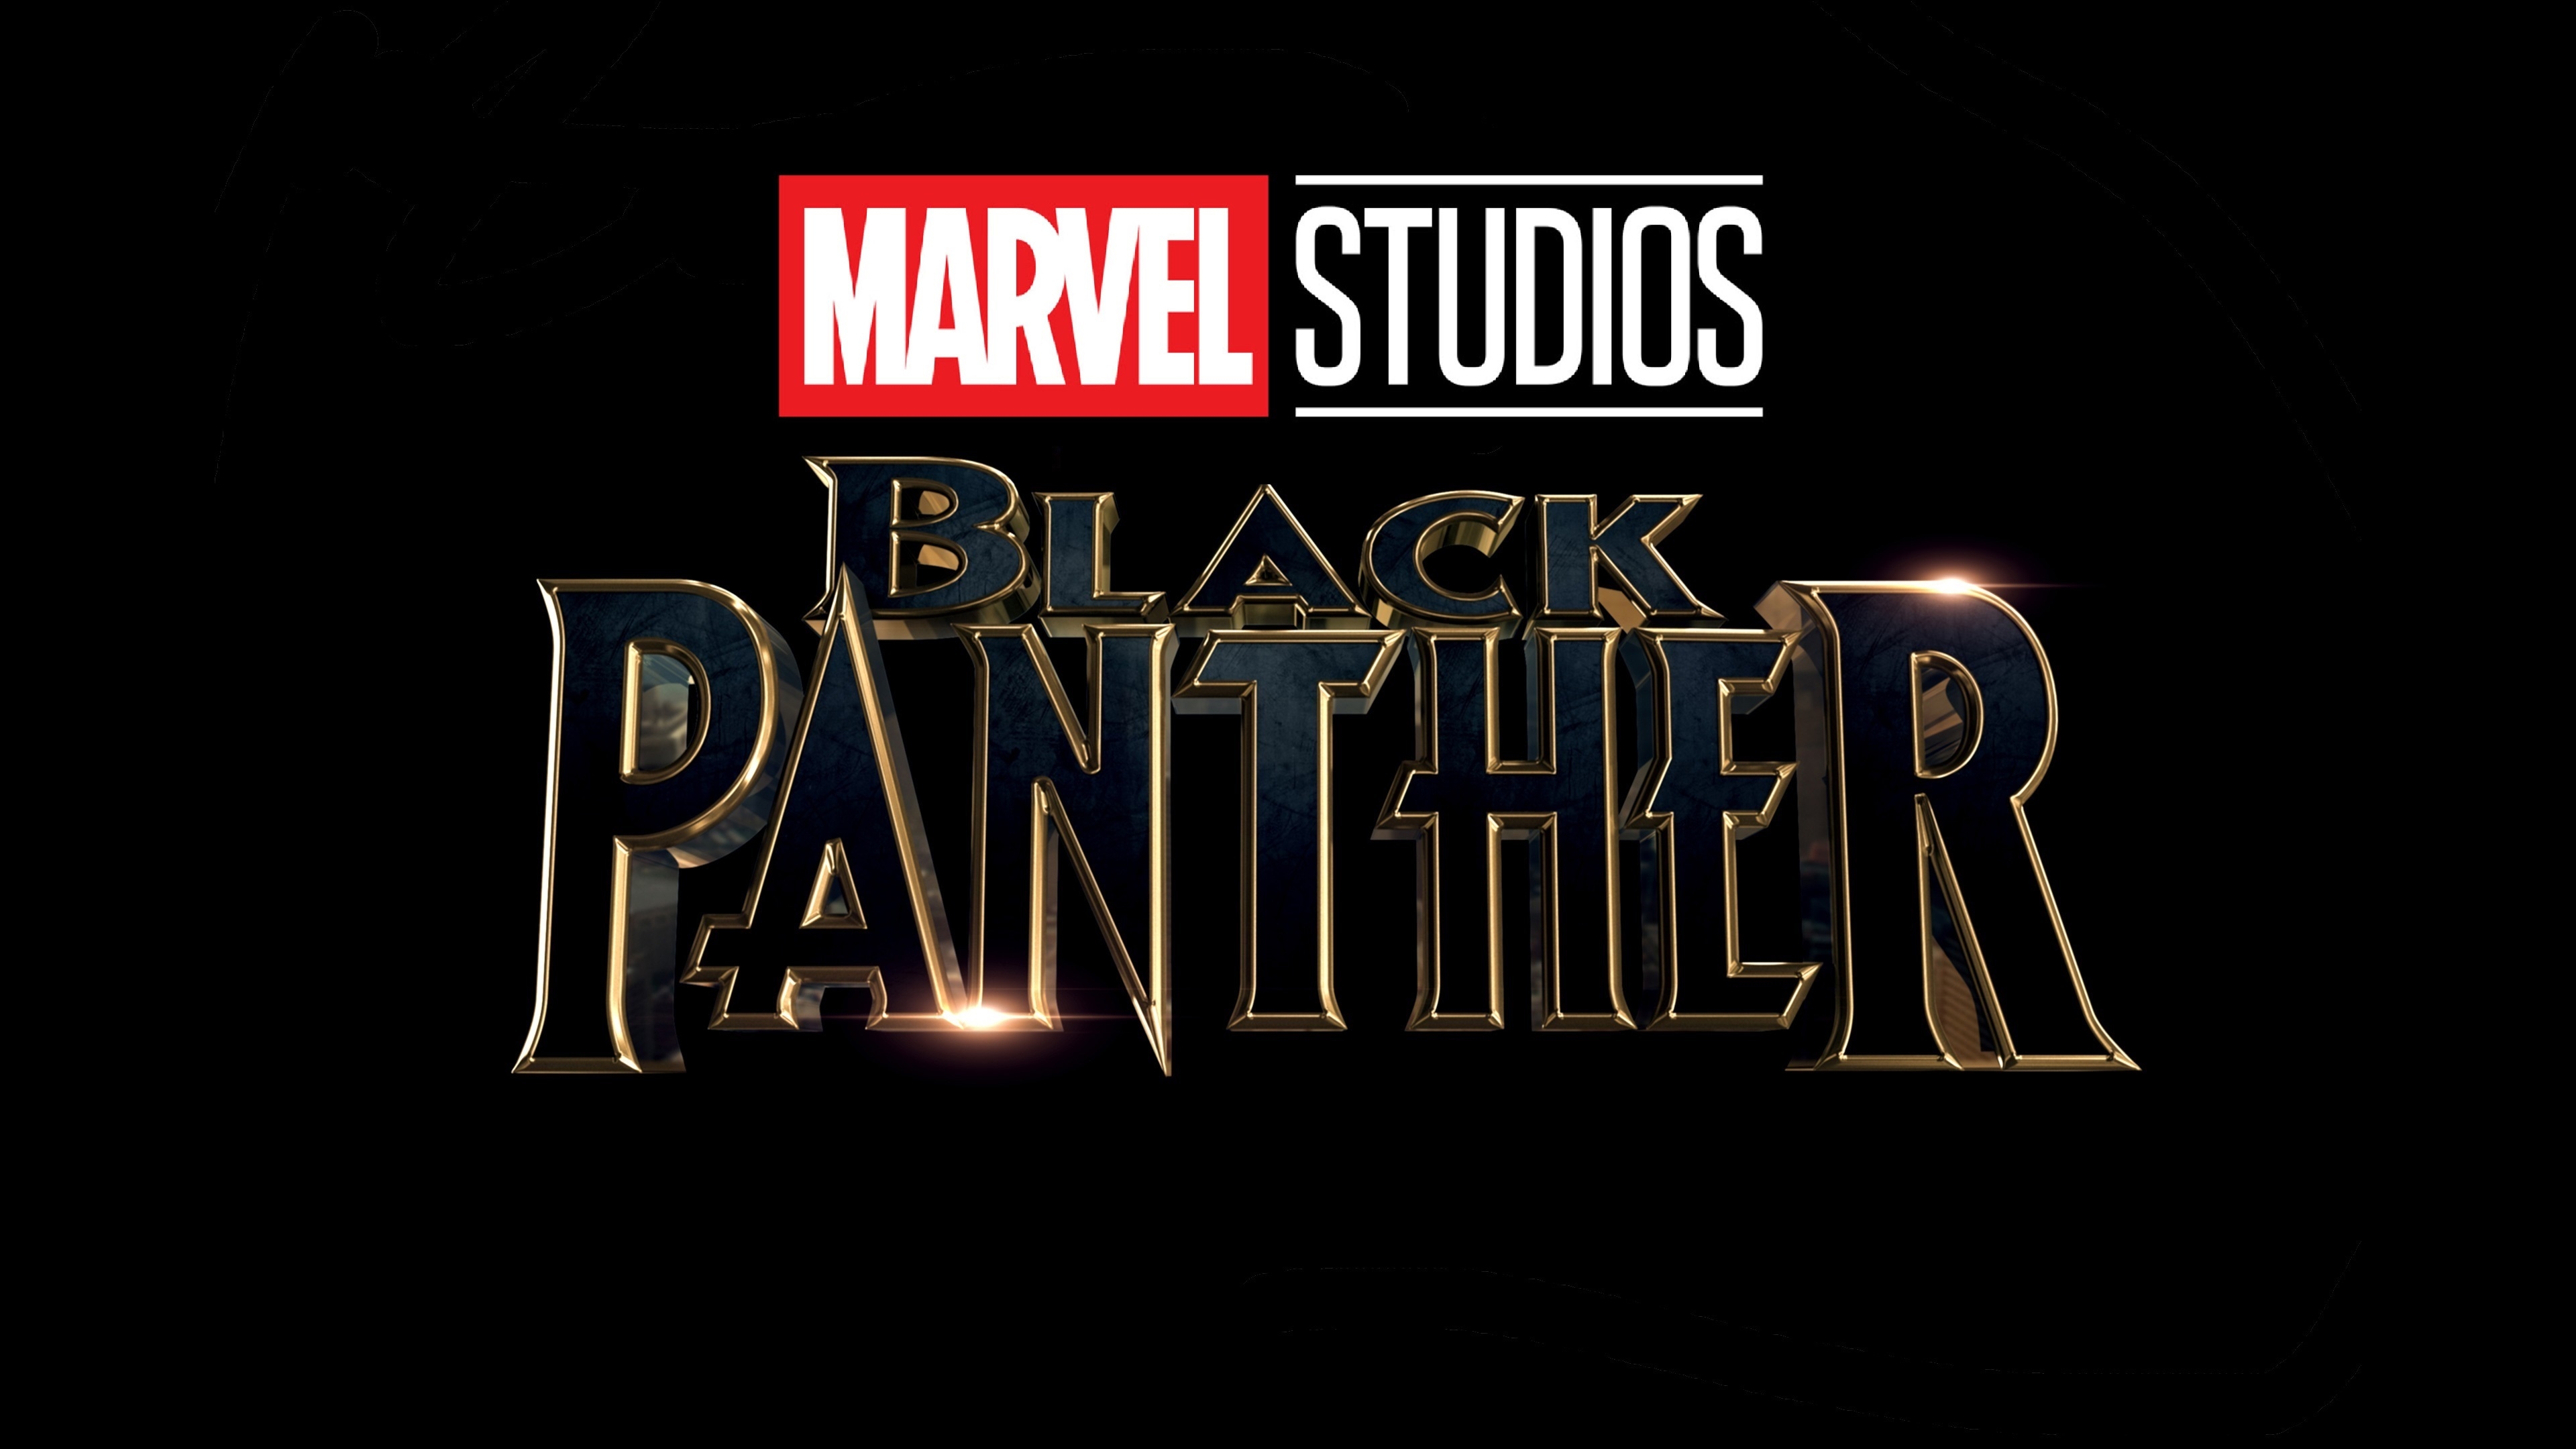 The Black Panther 2018 Movie Poster for 3840 x 2160 4K Ultra HDTV resolution